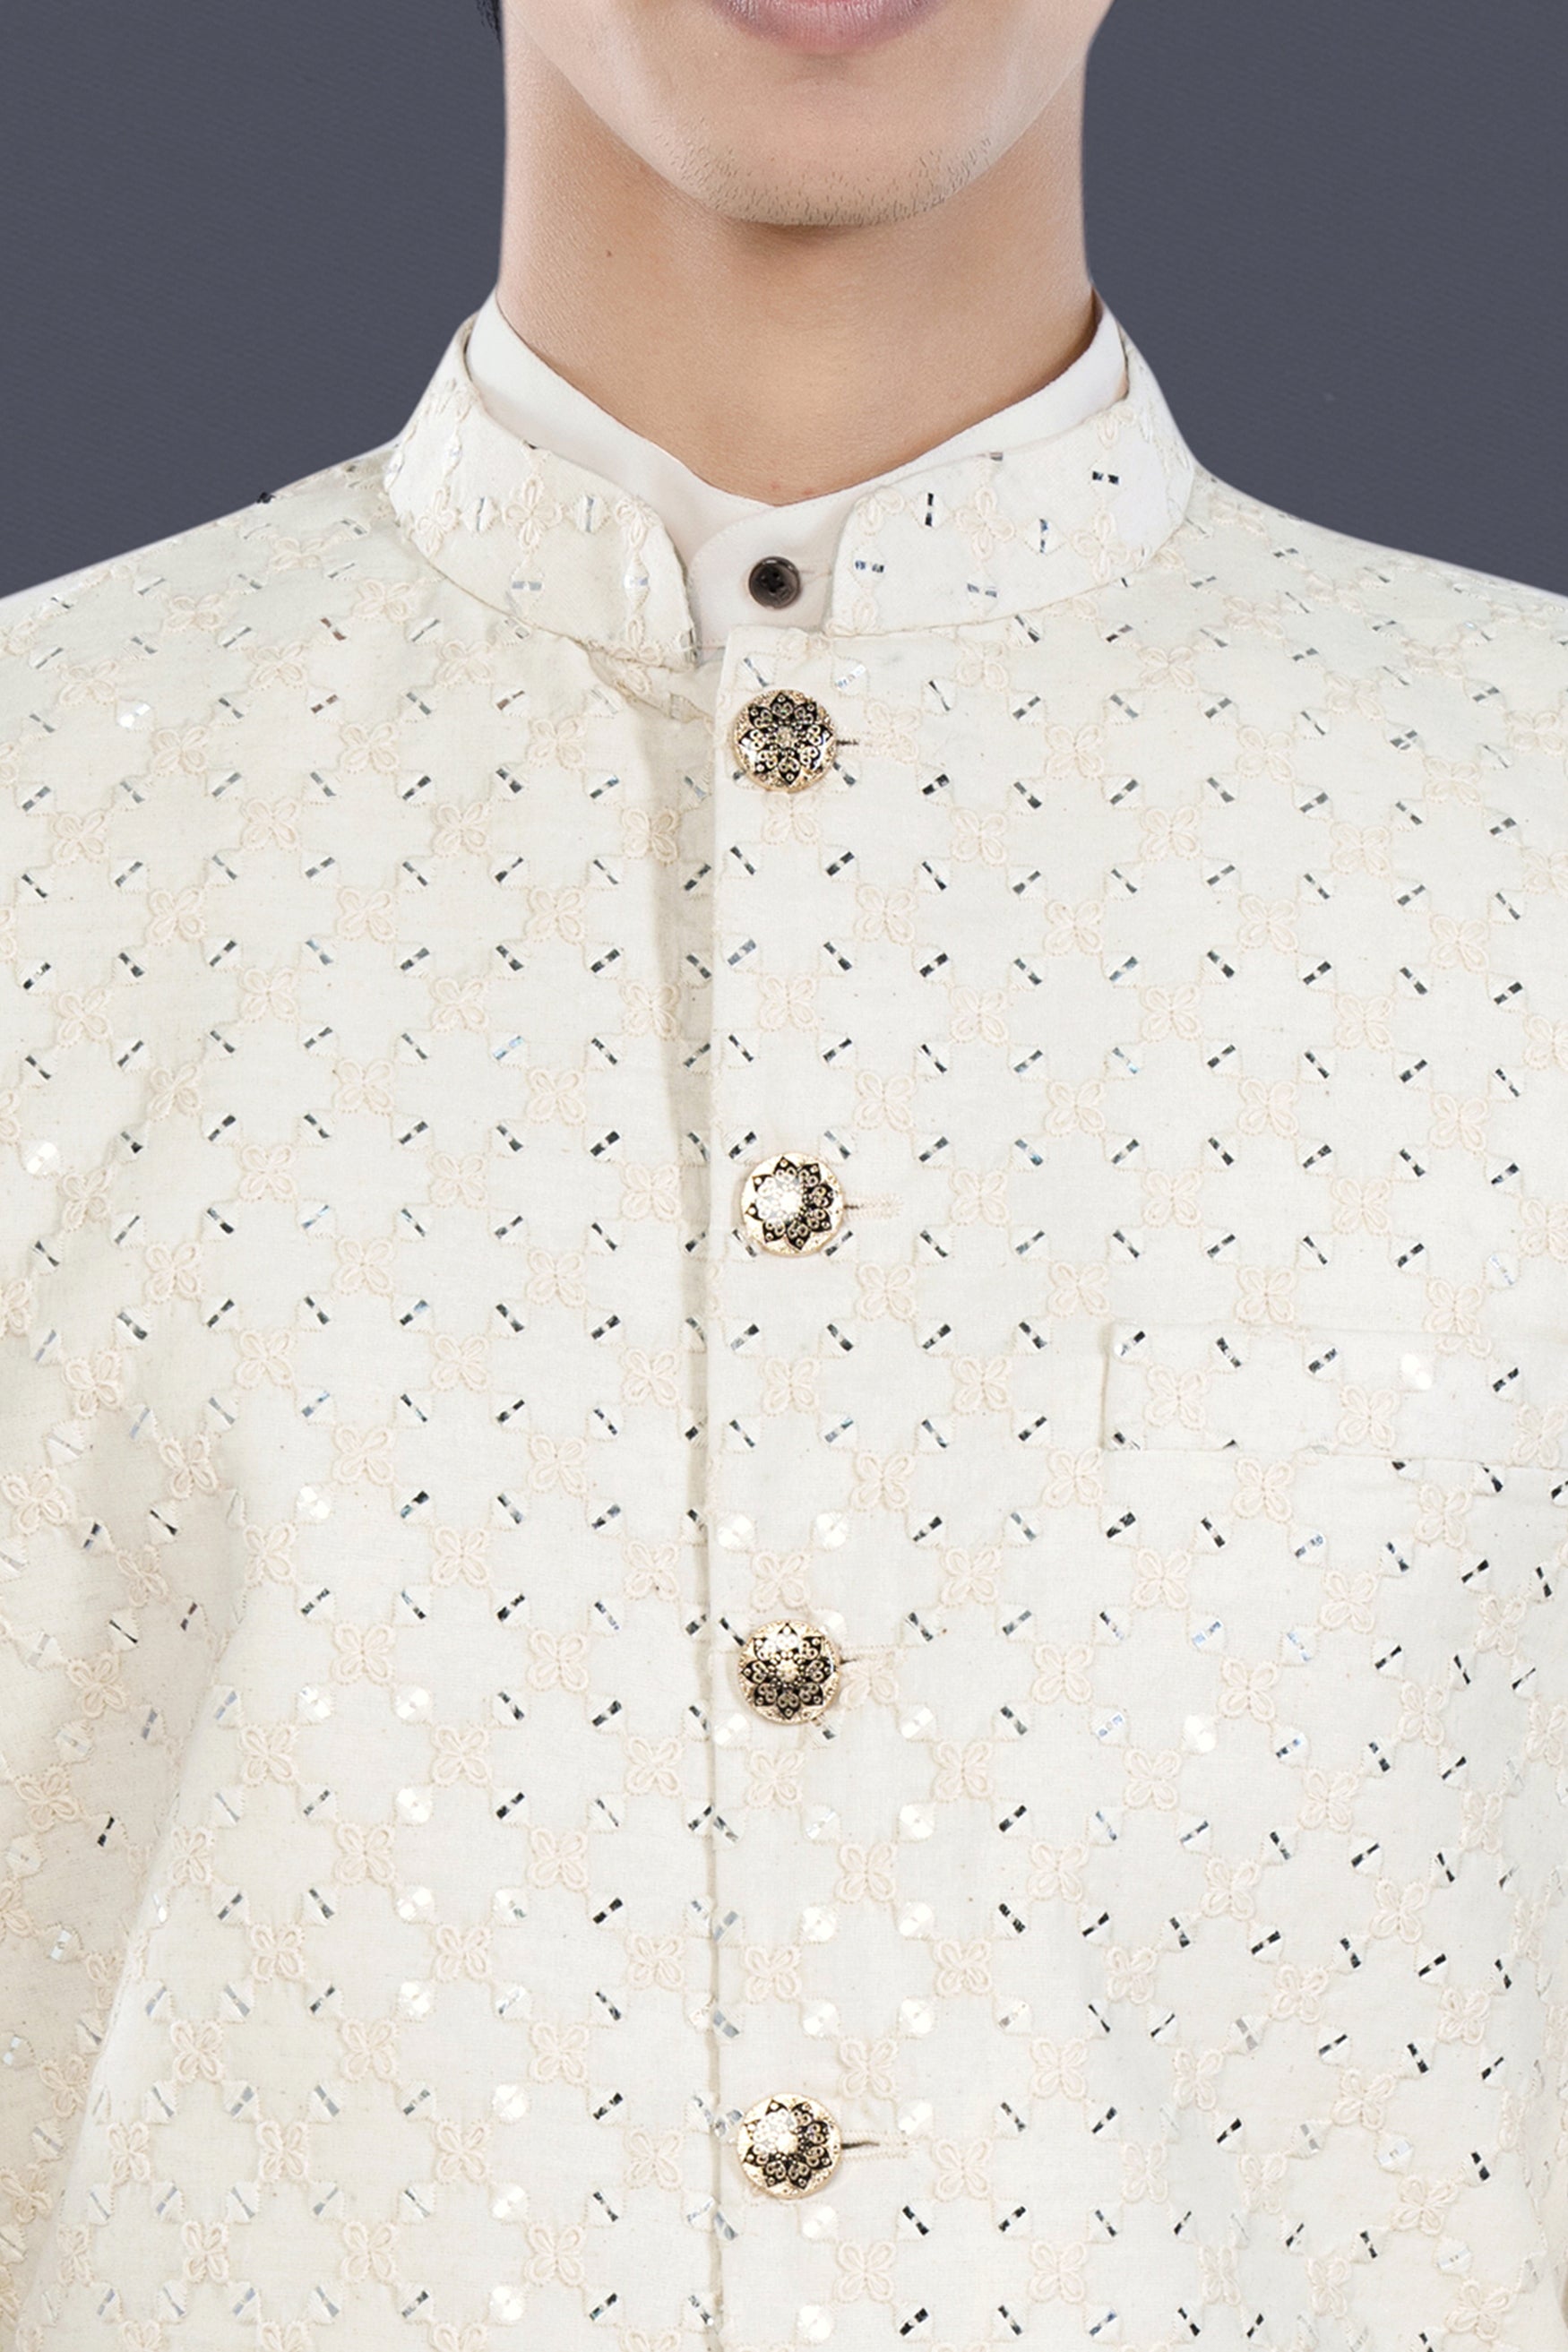 Bright White Geometric Thread and Sequin Embroidered Designer Nehru Jacket WC3473-36,  WC3473-38,  WC3473-40,  WC3473-42,  WC3473-44,  WC3473-46,  WC3473-48,  WC3473-50,  WC3473-52,  WC3473-54,  WC3473-56,  WC3473-58,  WC3473-60